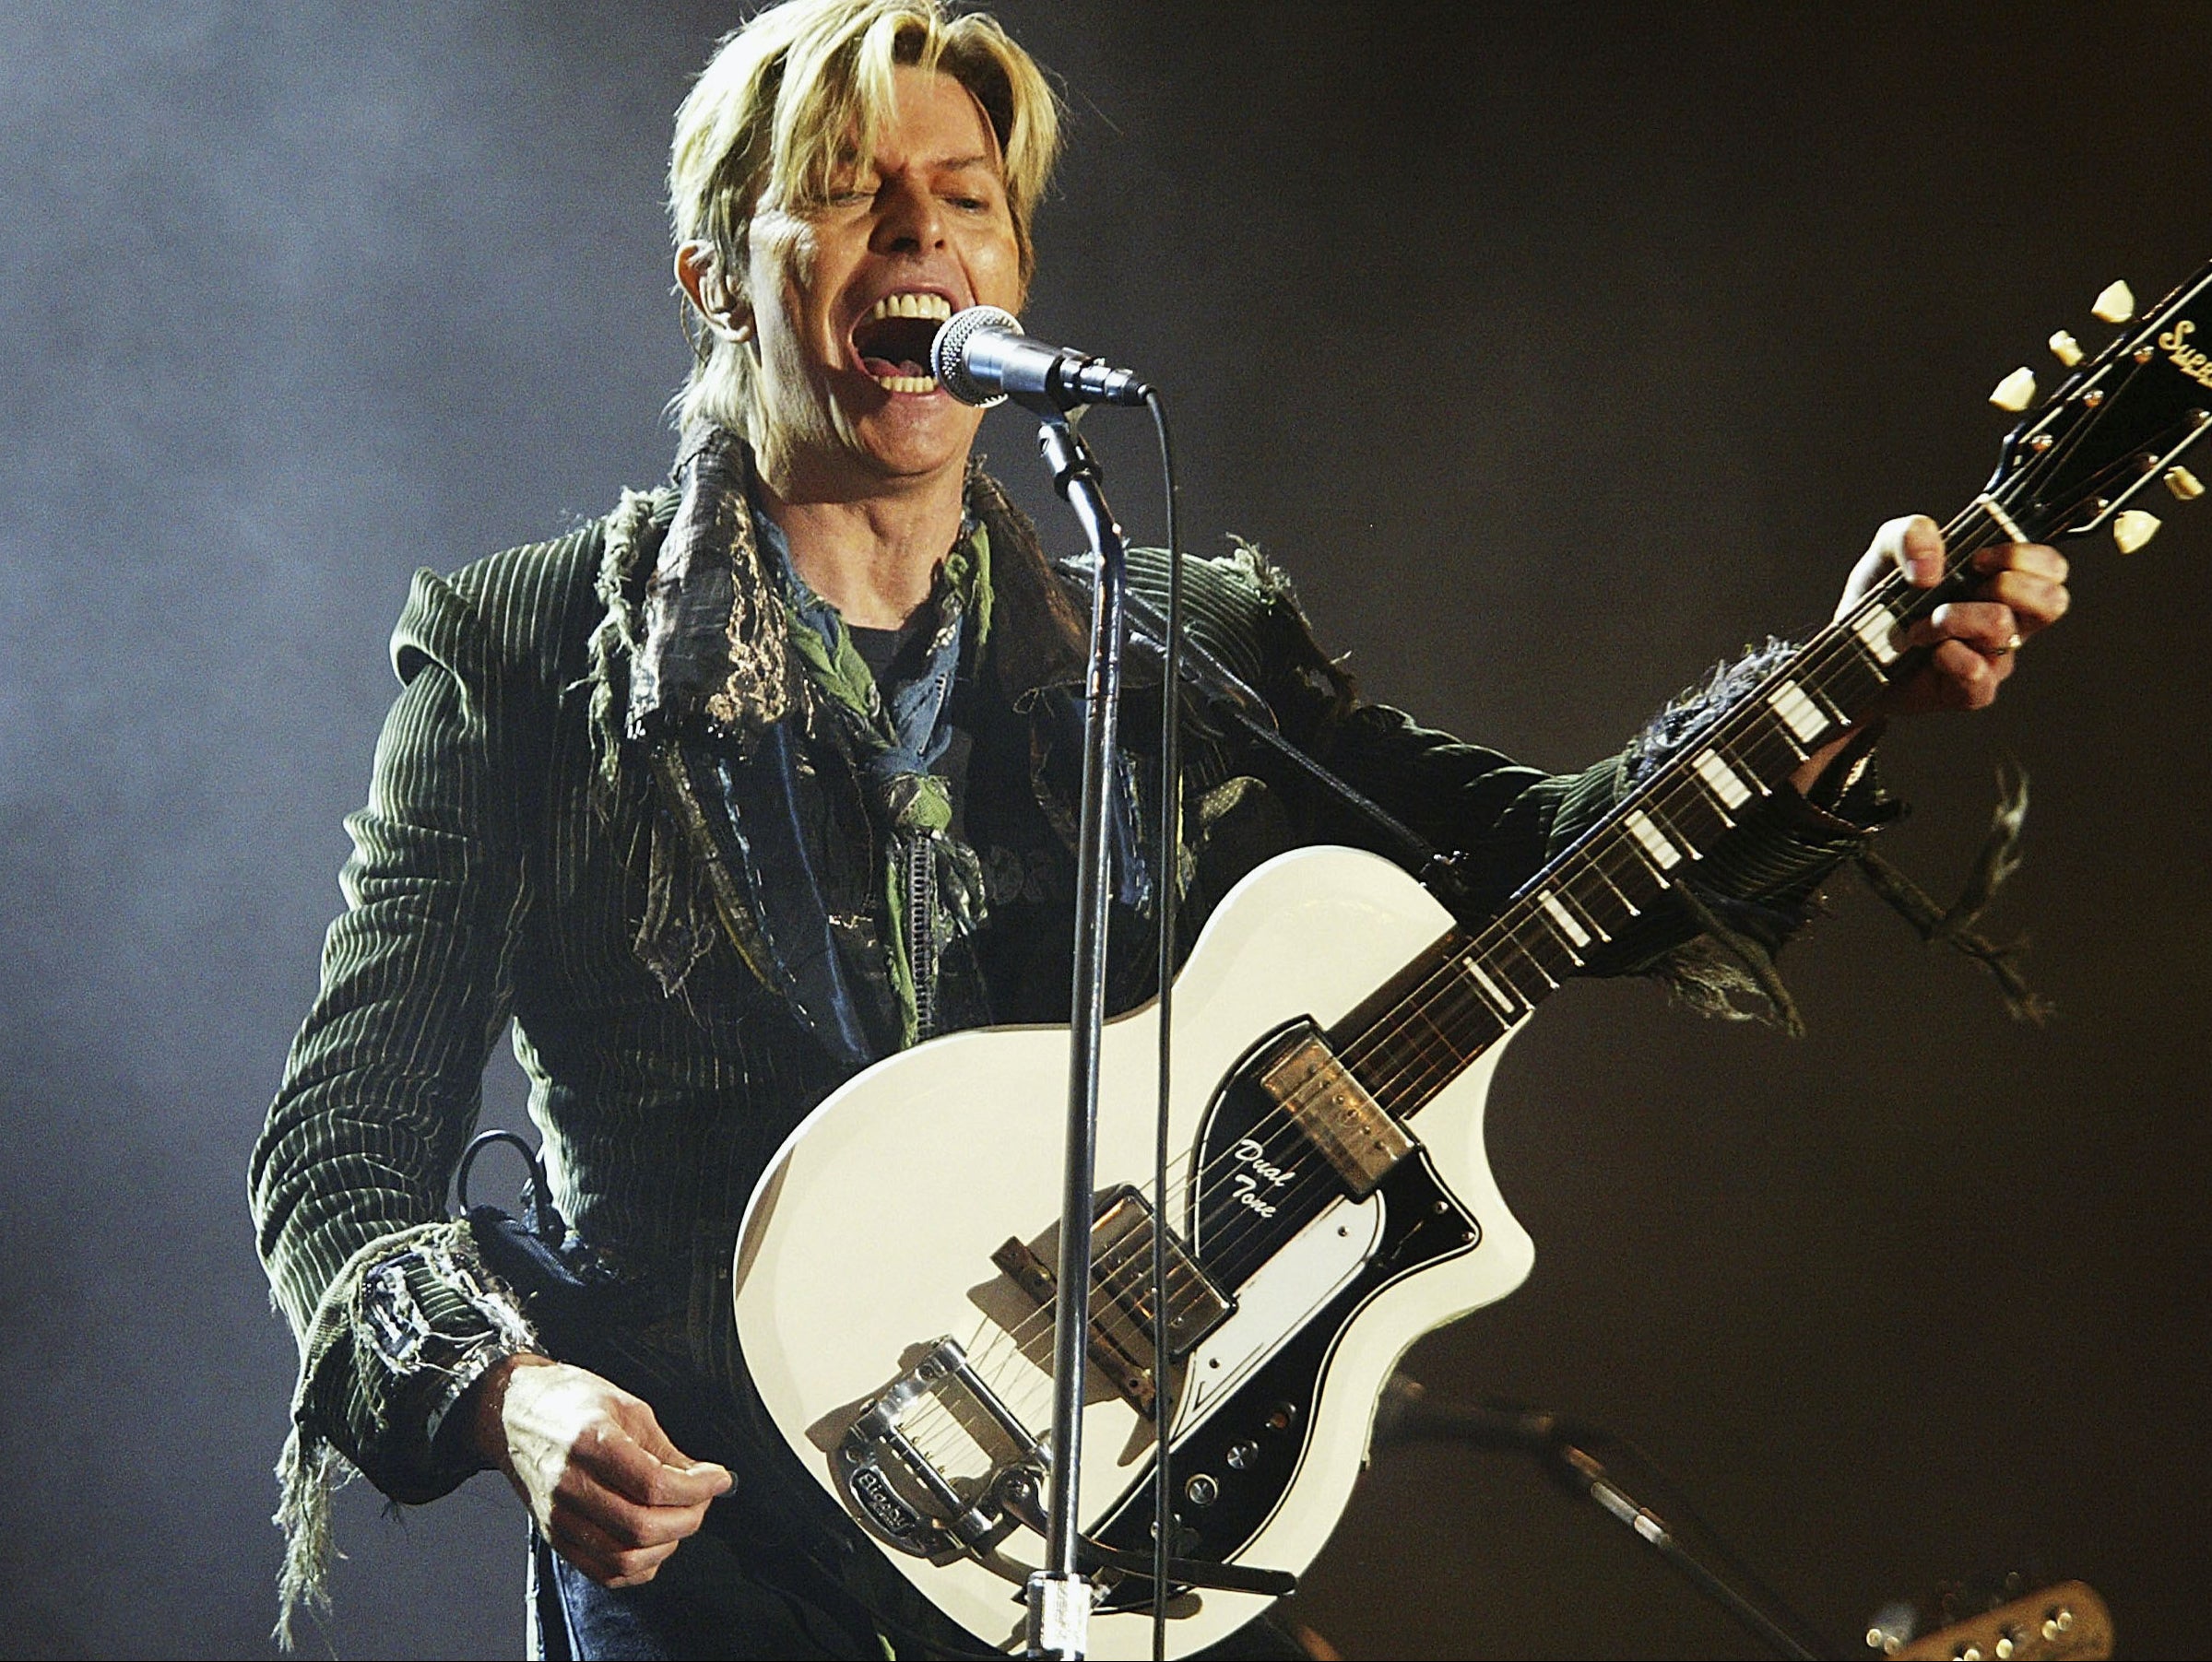 Jarvis’s unlikely saviour: the late David Bowie